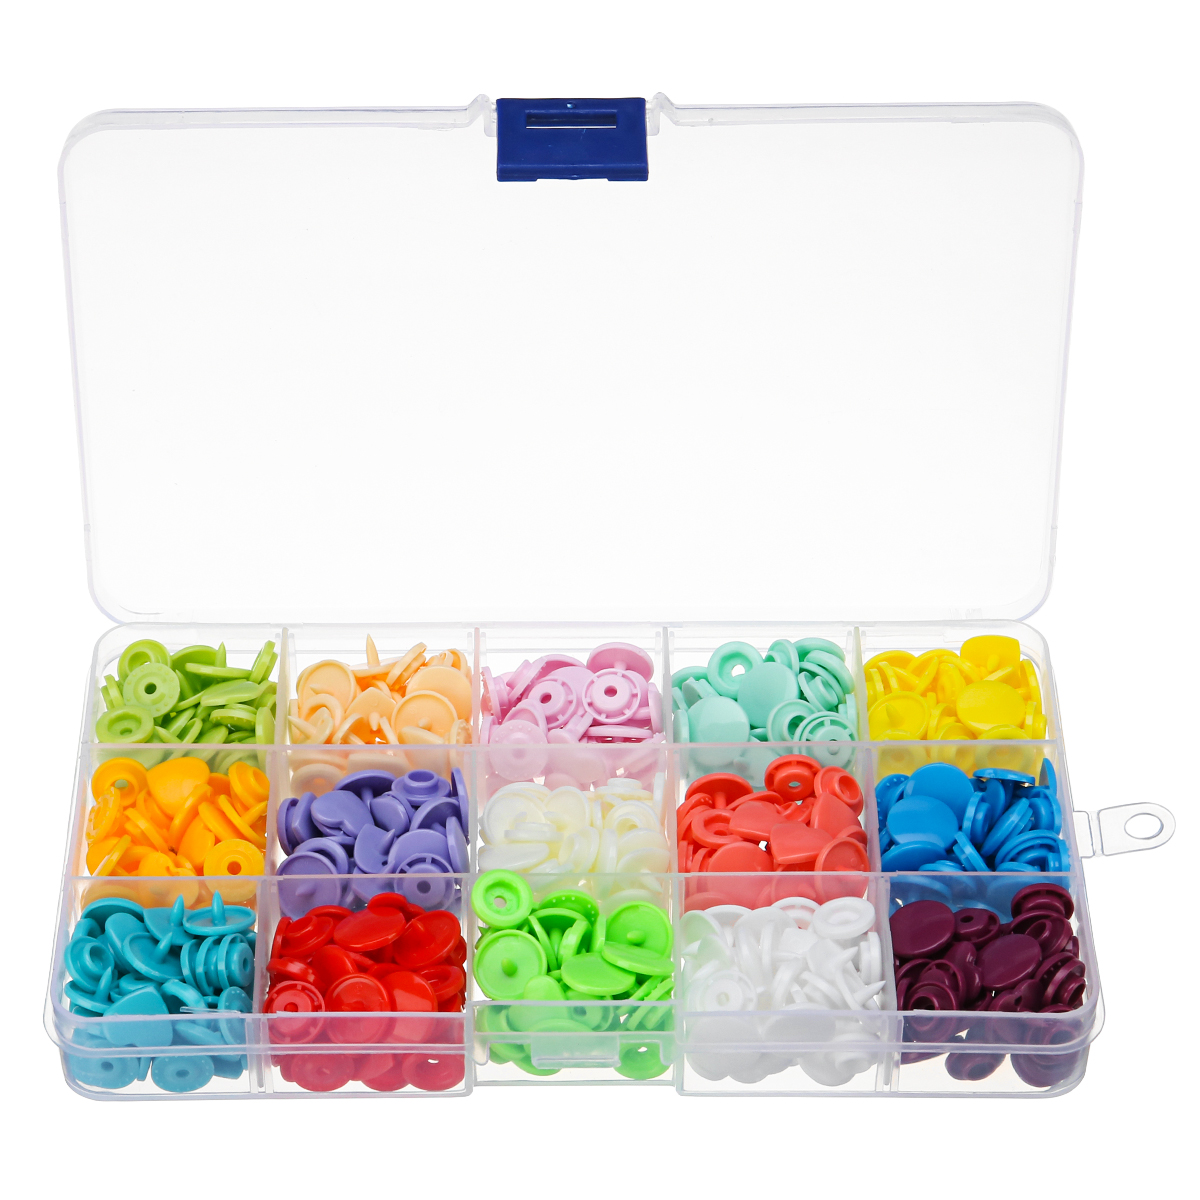 

15 Colors 150Pcs Plastic Resin Fastener Snap Heart Buttons DIY Cloth Craft Kit With Storage Case